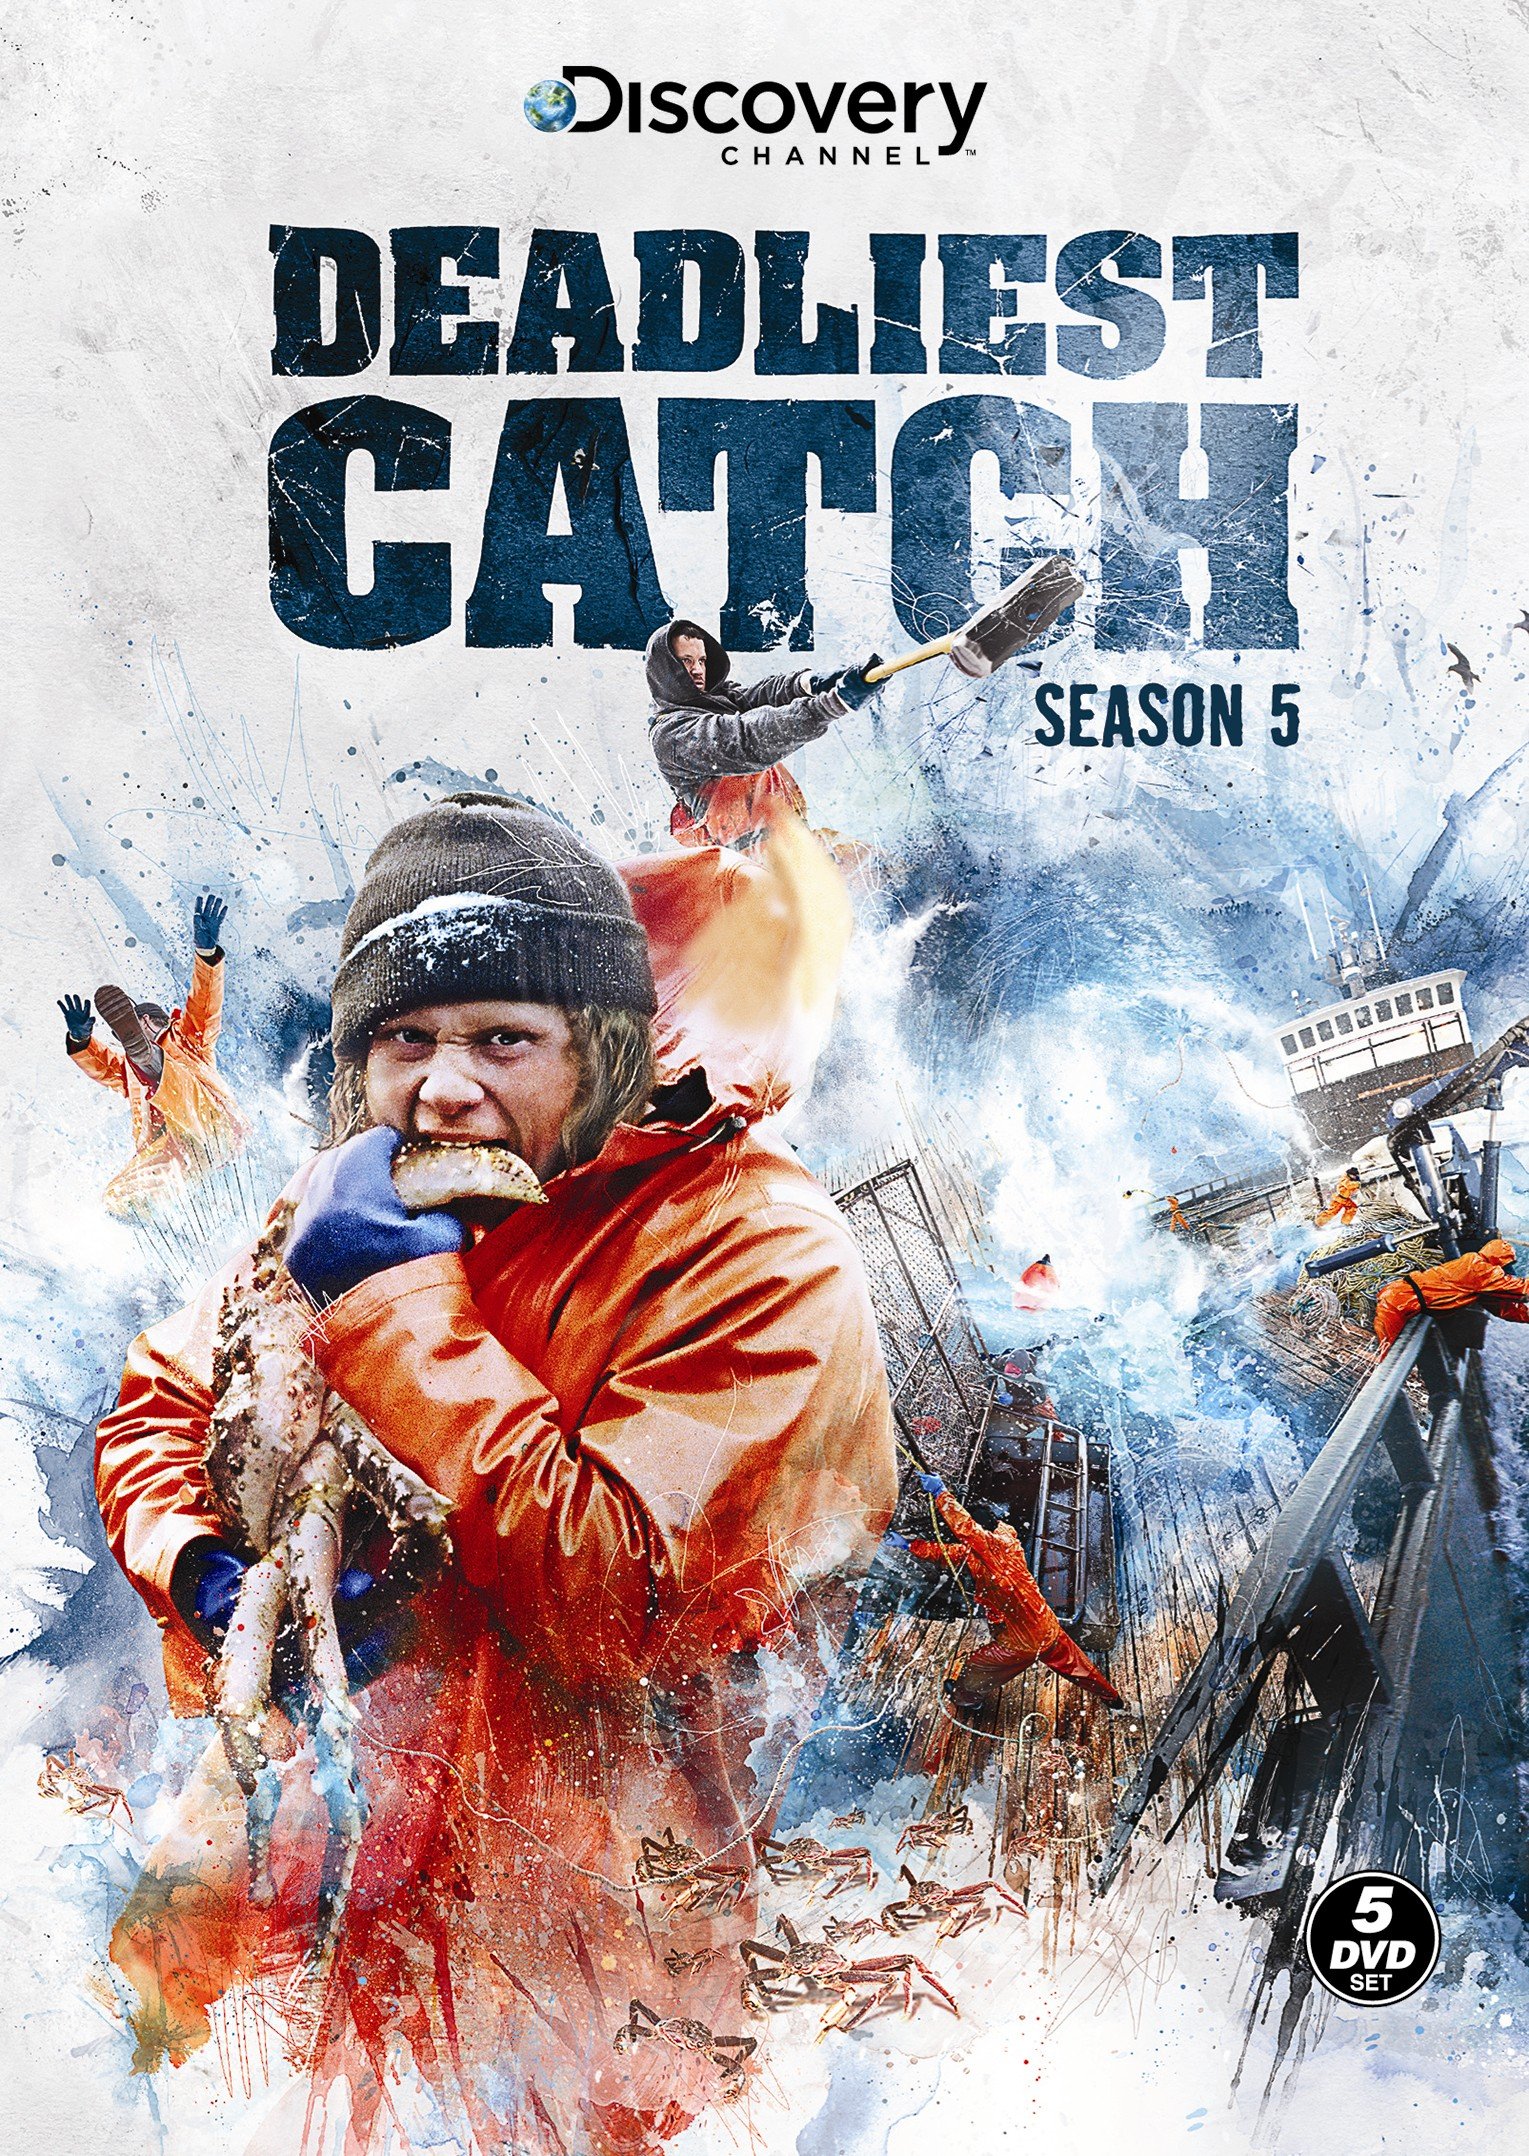 The Surplus of Drama That Has Sprung From Deadliest Catch 